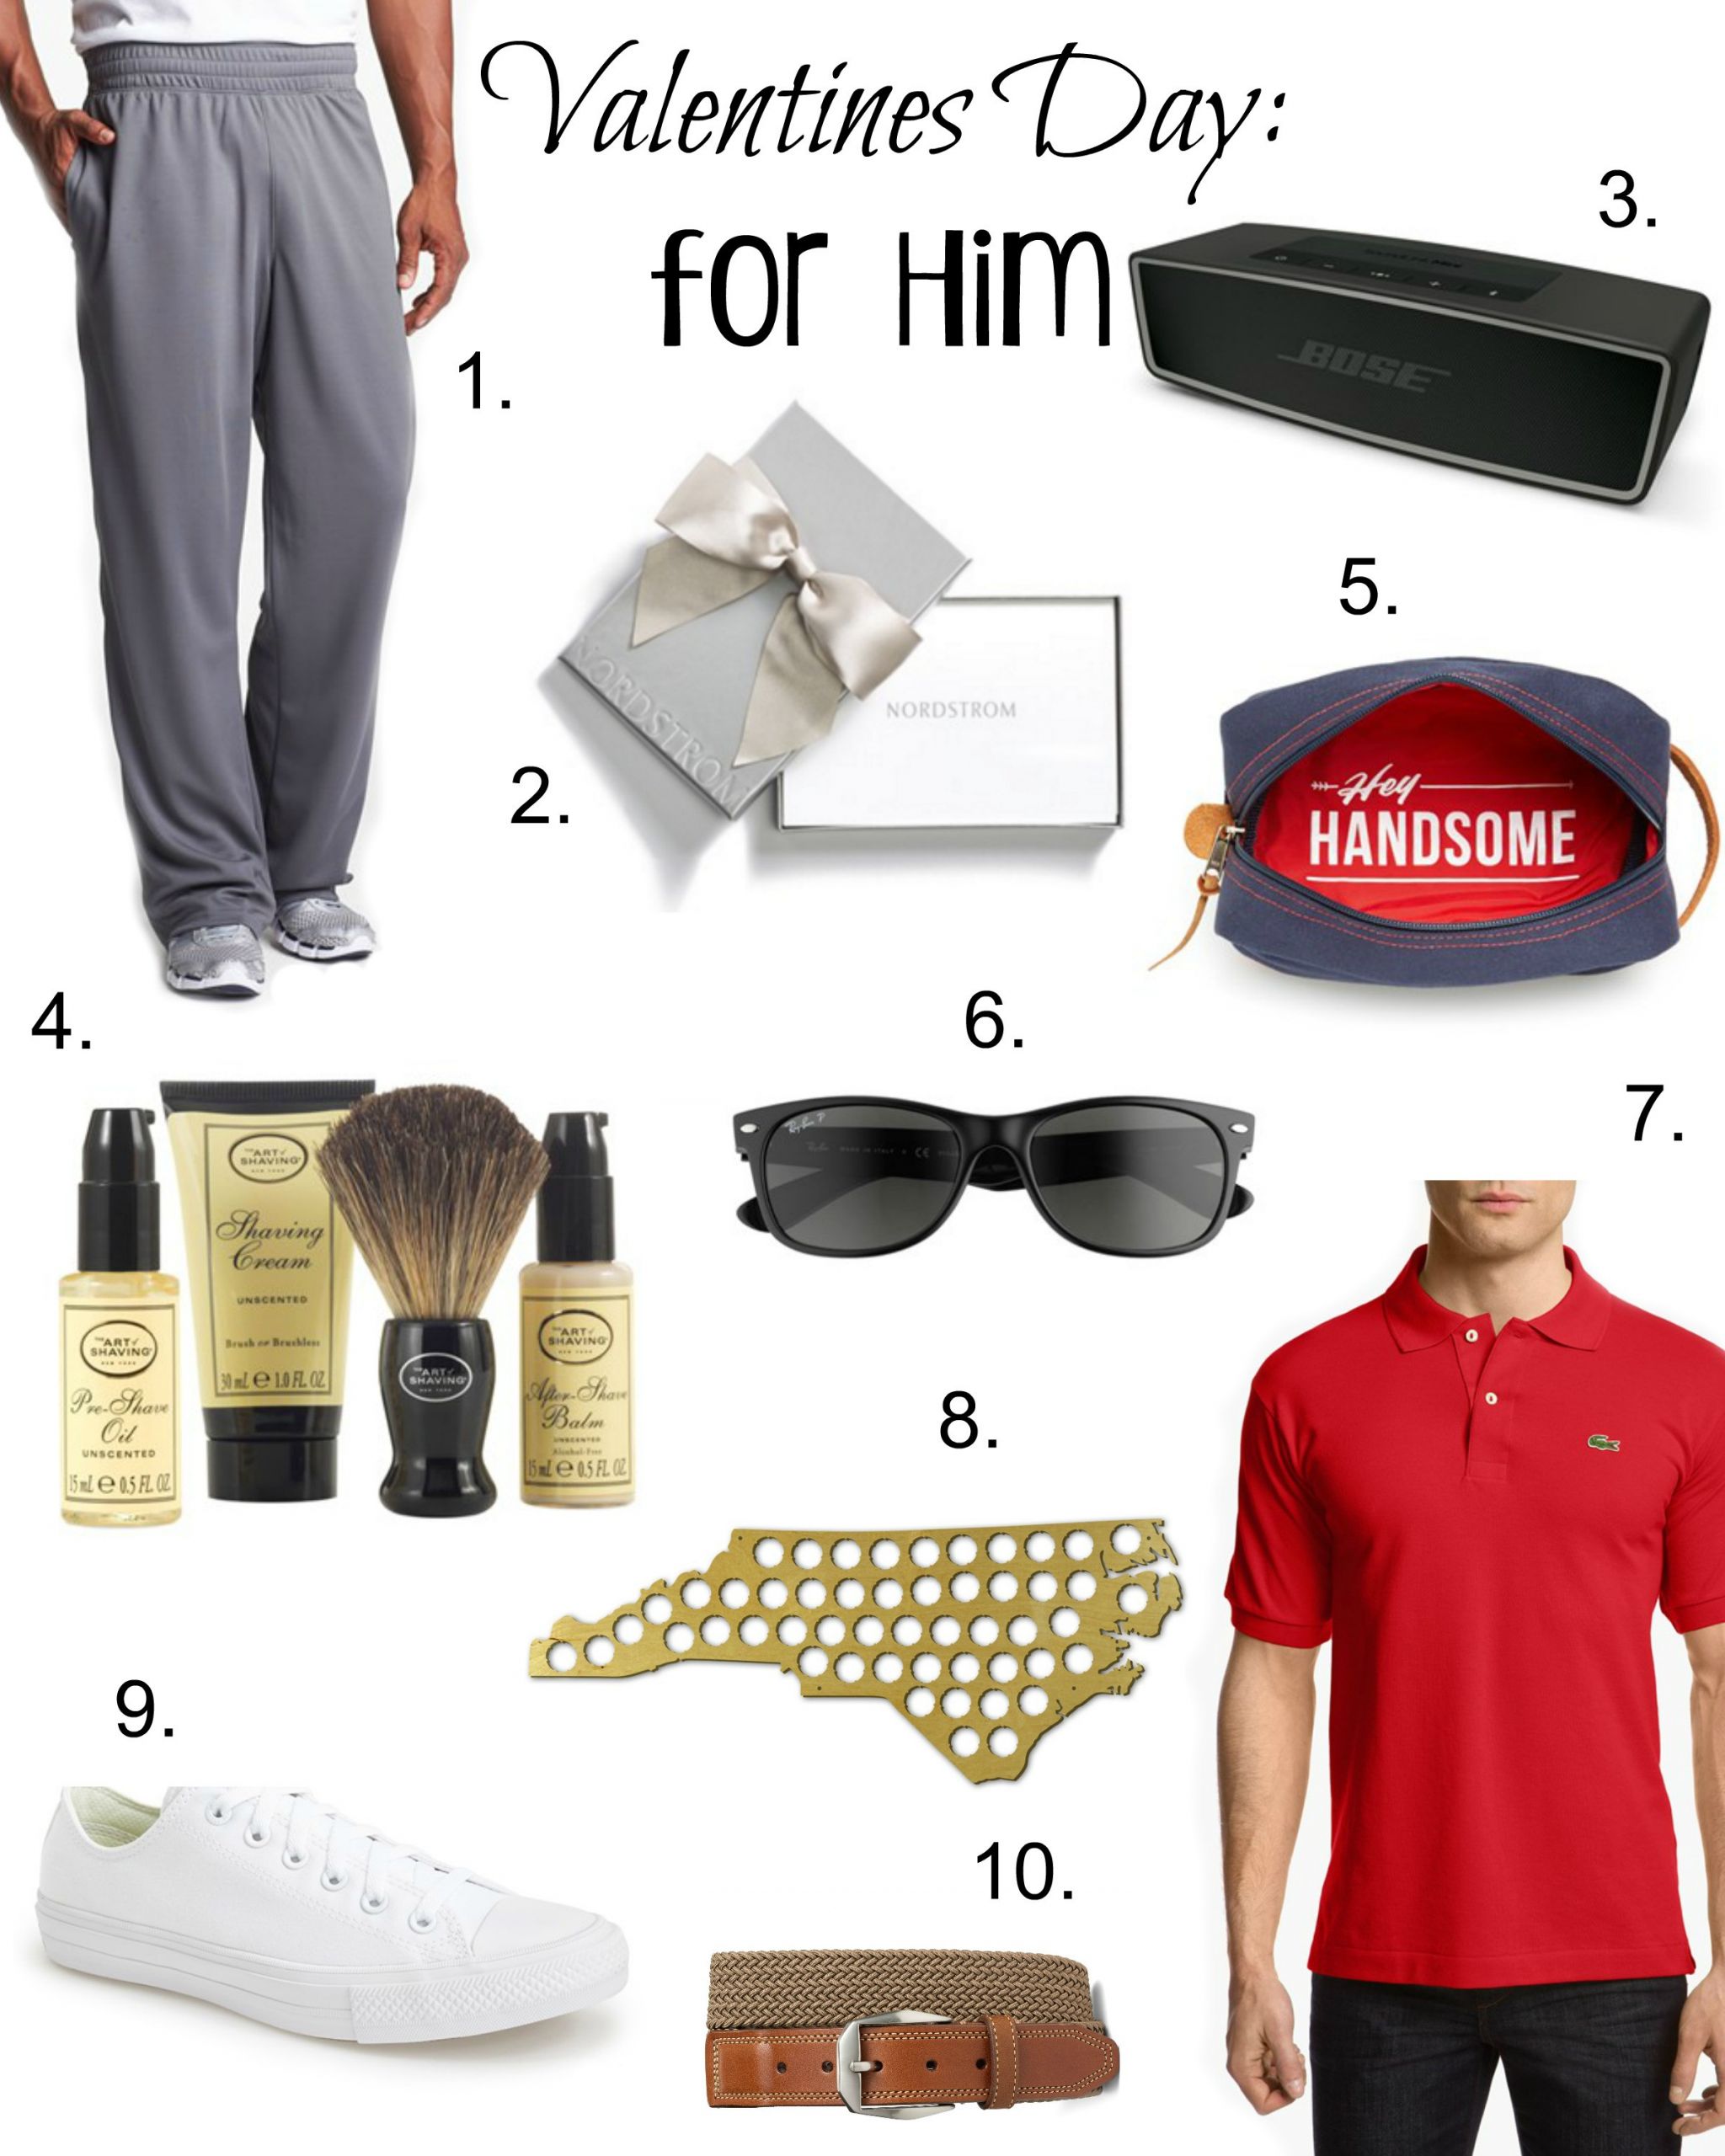 Best Valentines Day Gifts
 Top 10 Valentines Day Gifts For Him